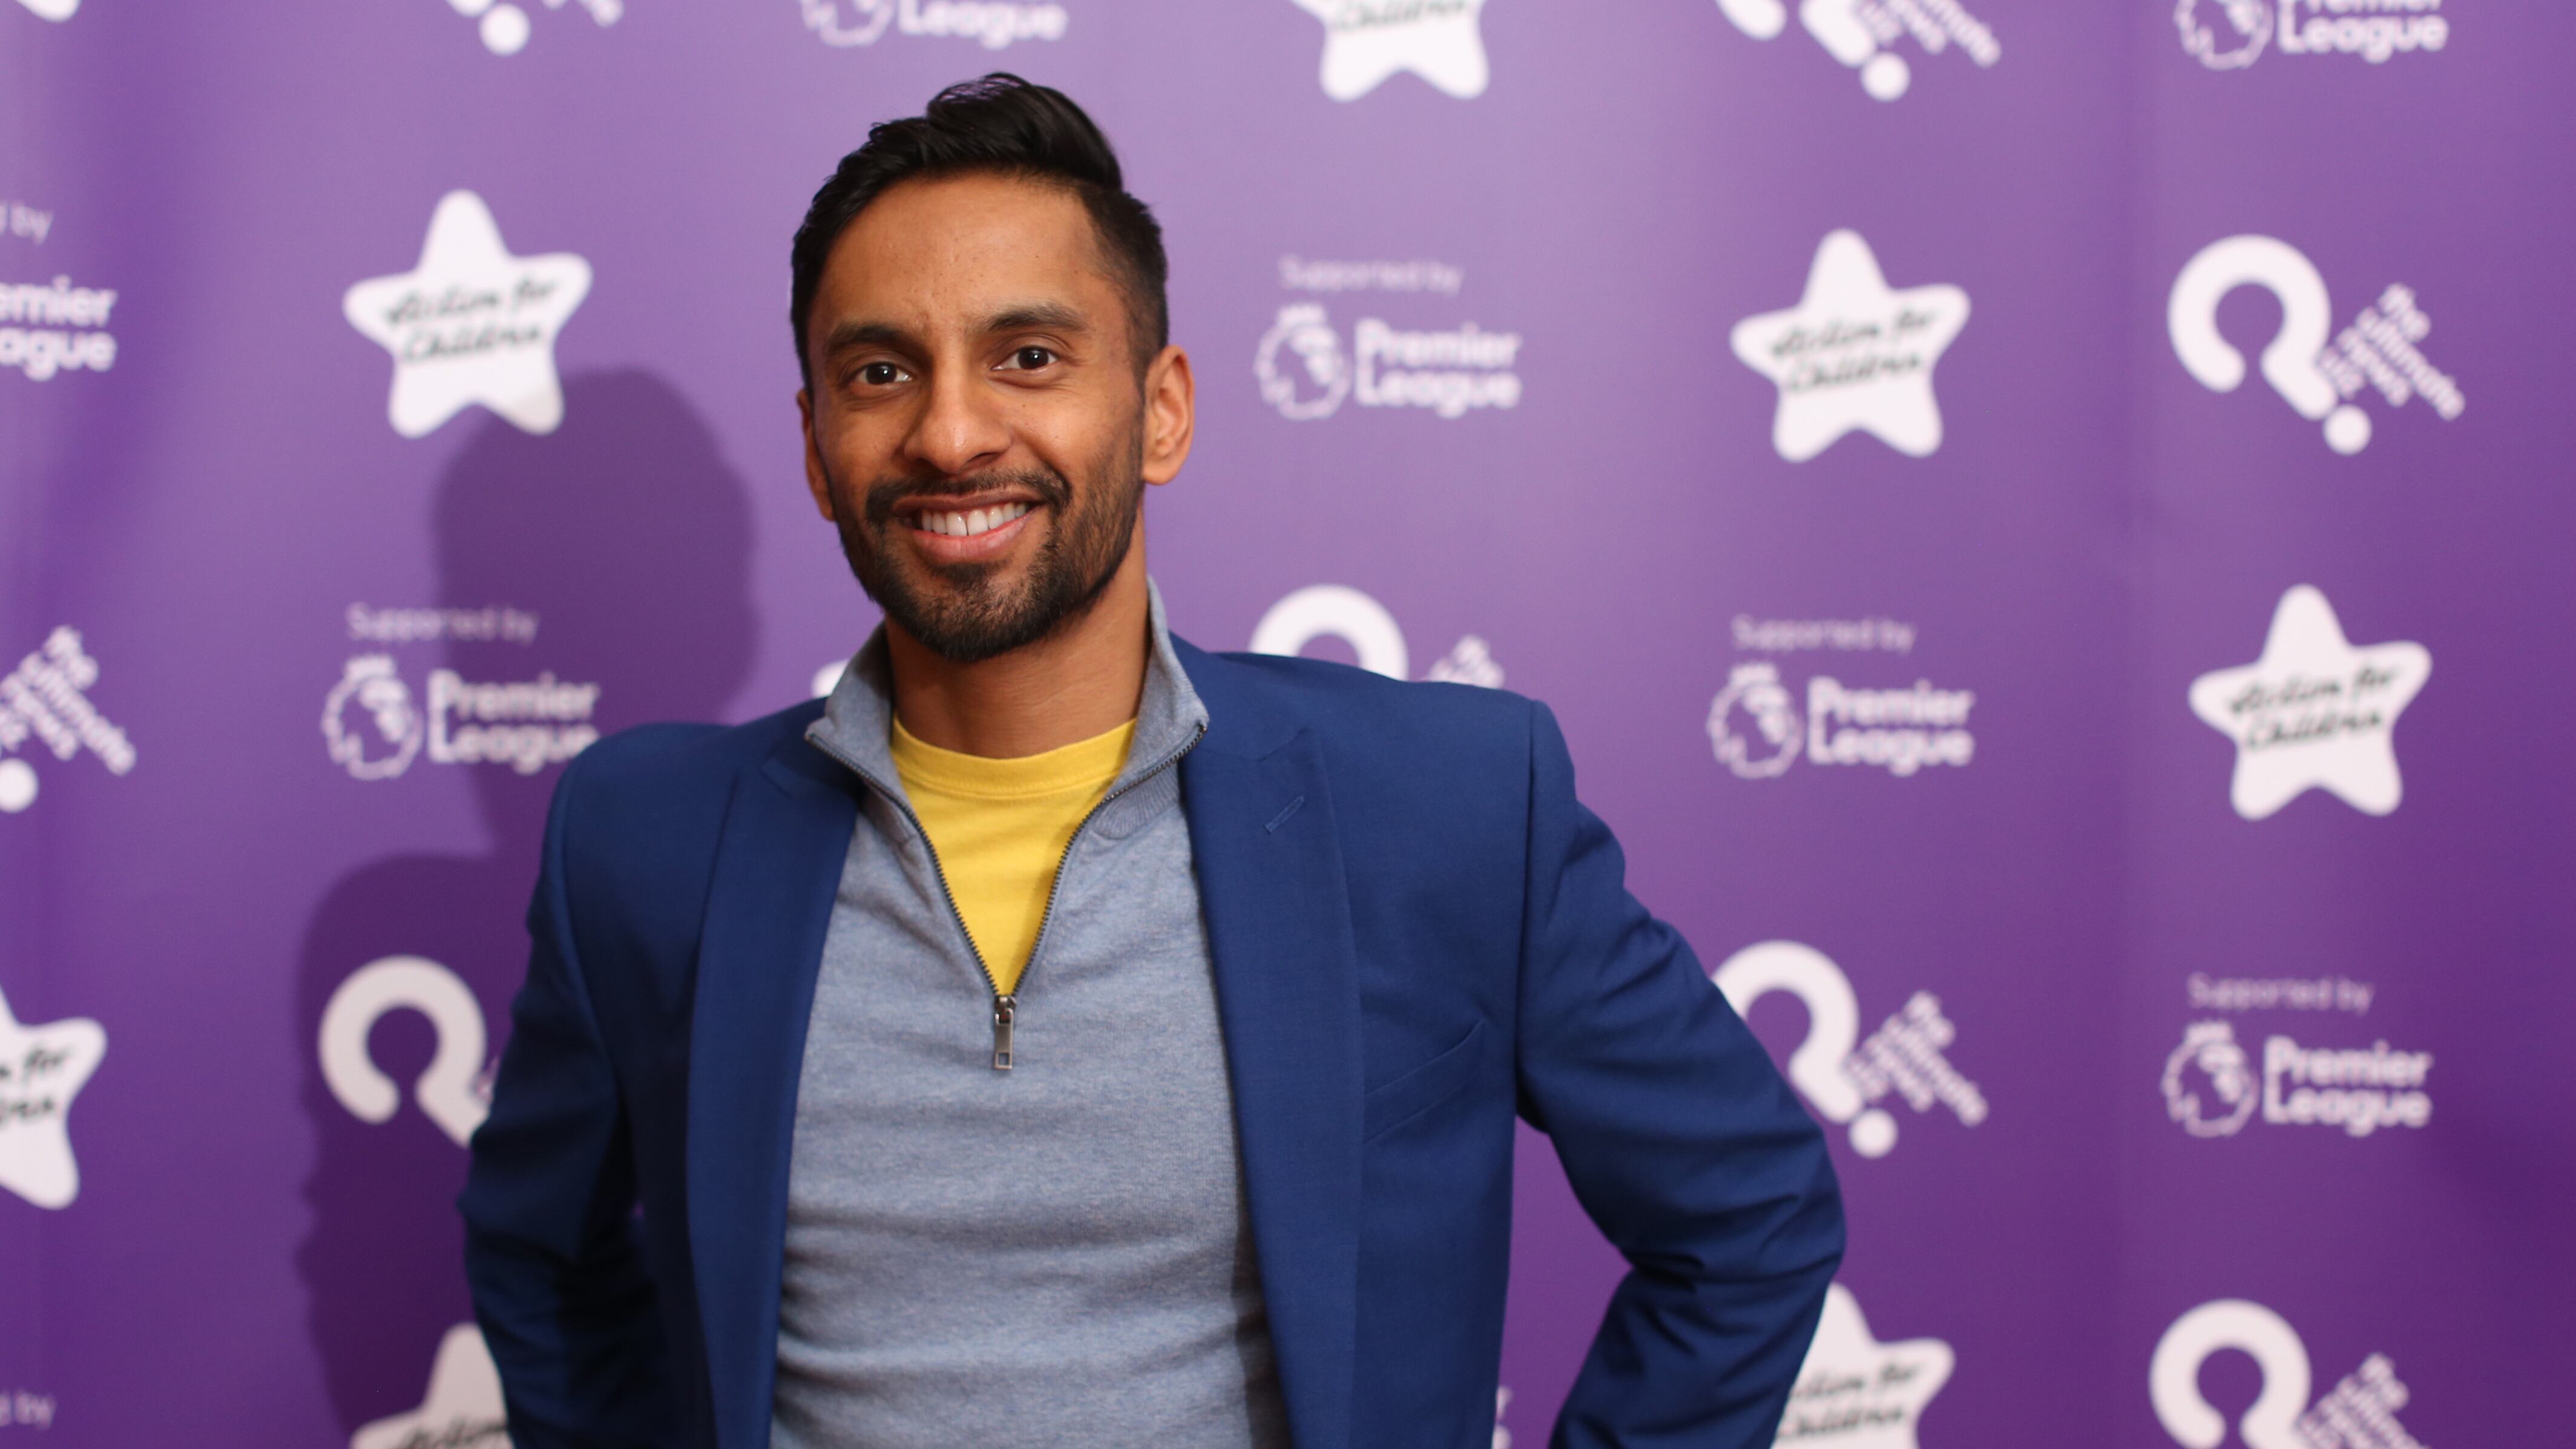 Teacher and broadcaster Bobby Seagull has partnered with Vanquis Bank to launch a series of simple video guides around financial terms